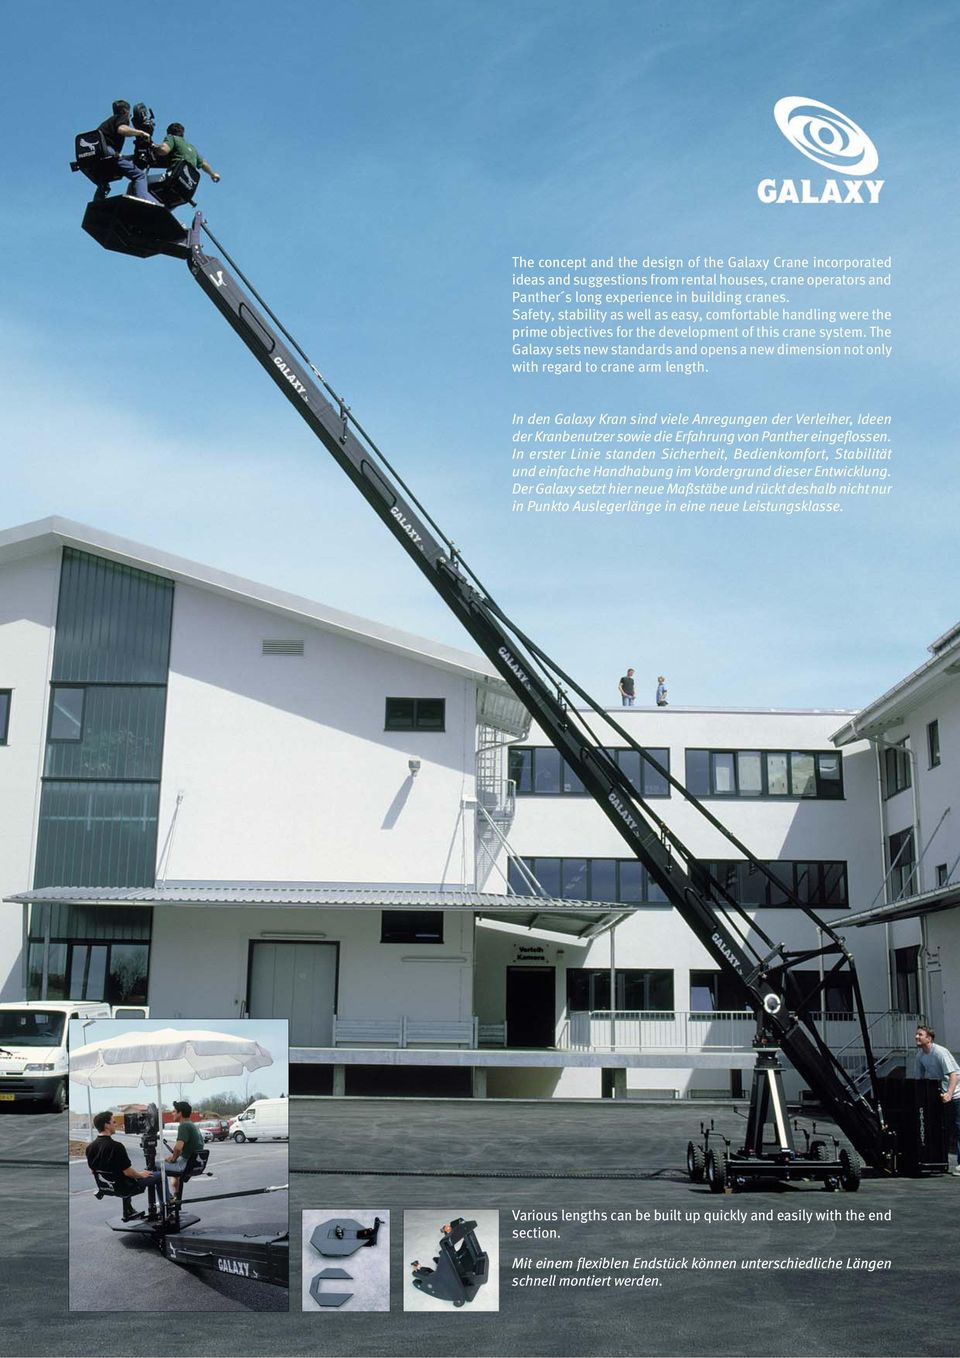 The Galaxy sets new standards and opens a new dimension not only with regard to crane arm length.